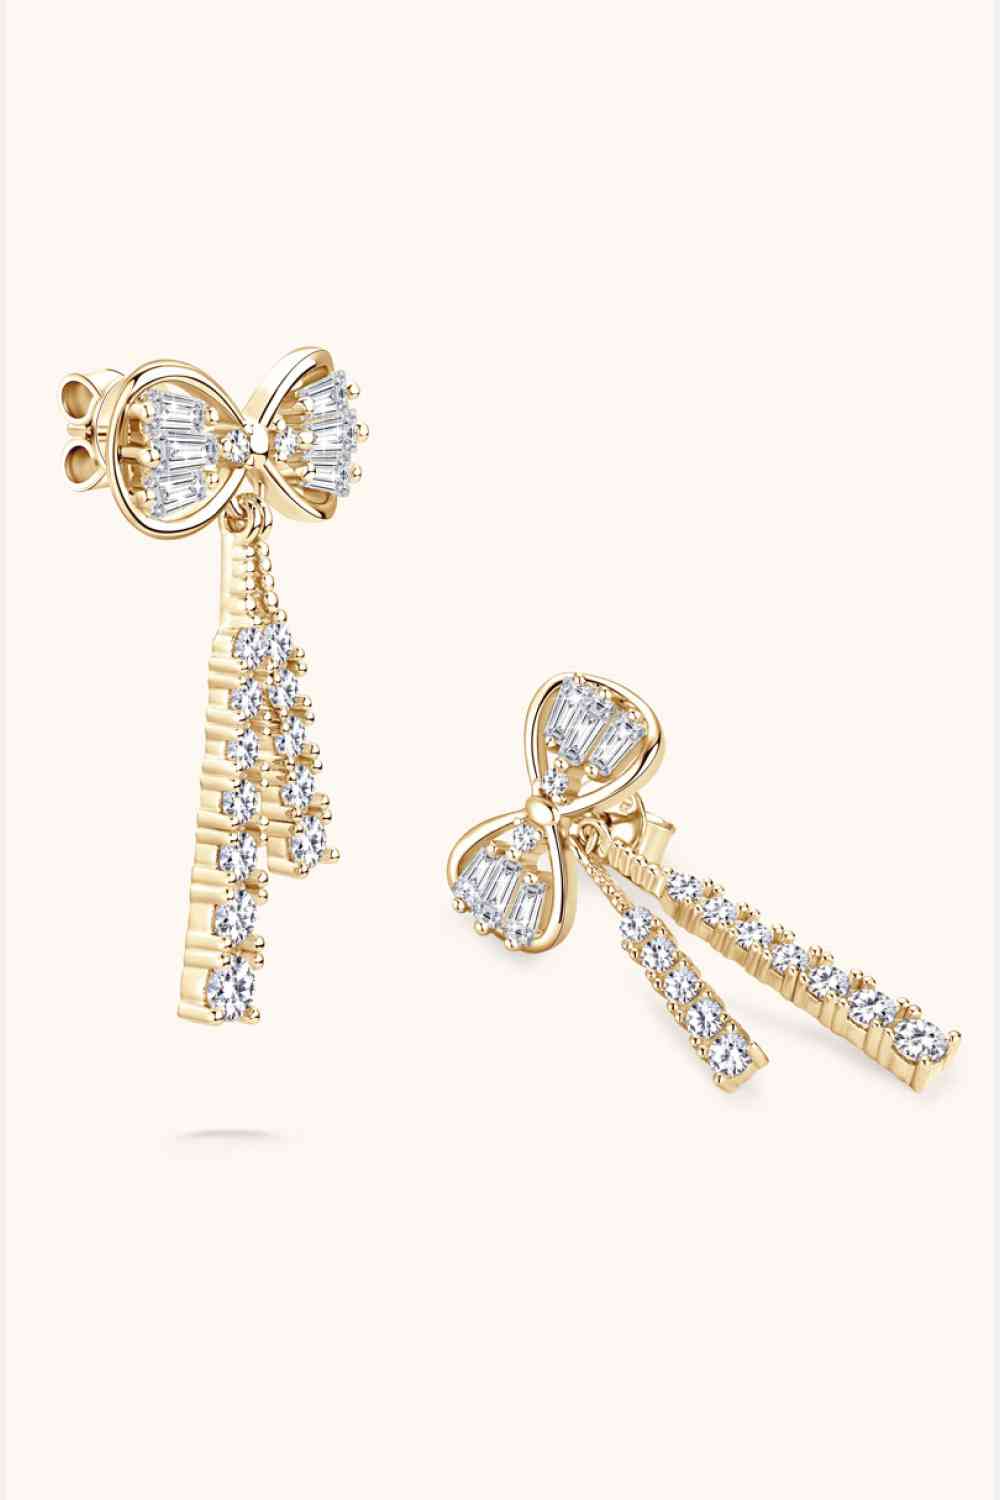 a pair of earrings with a bow and a key